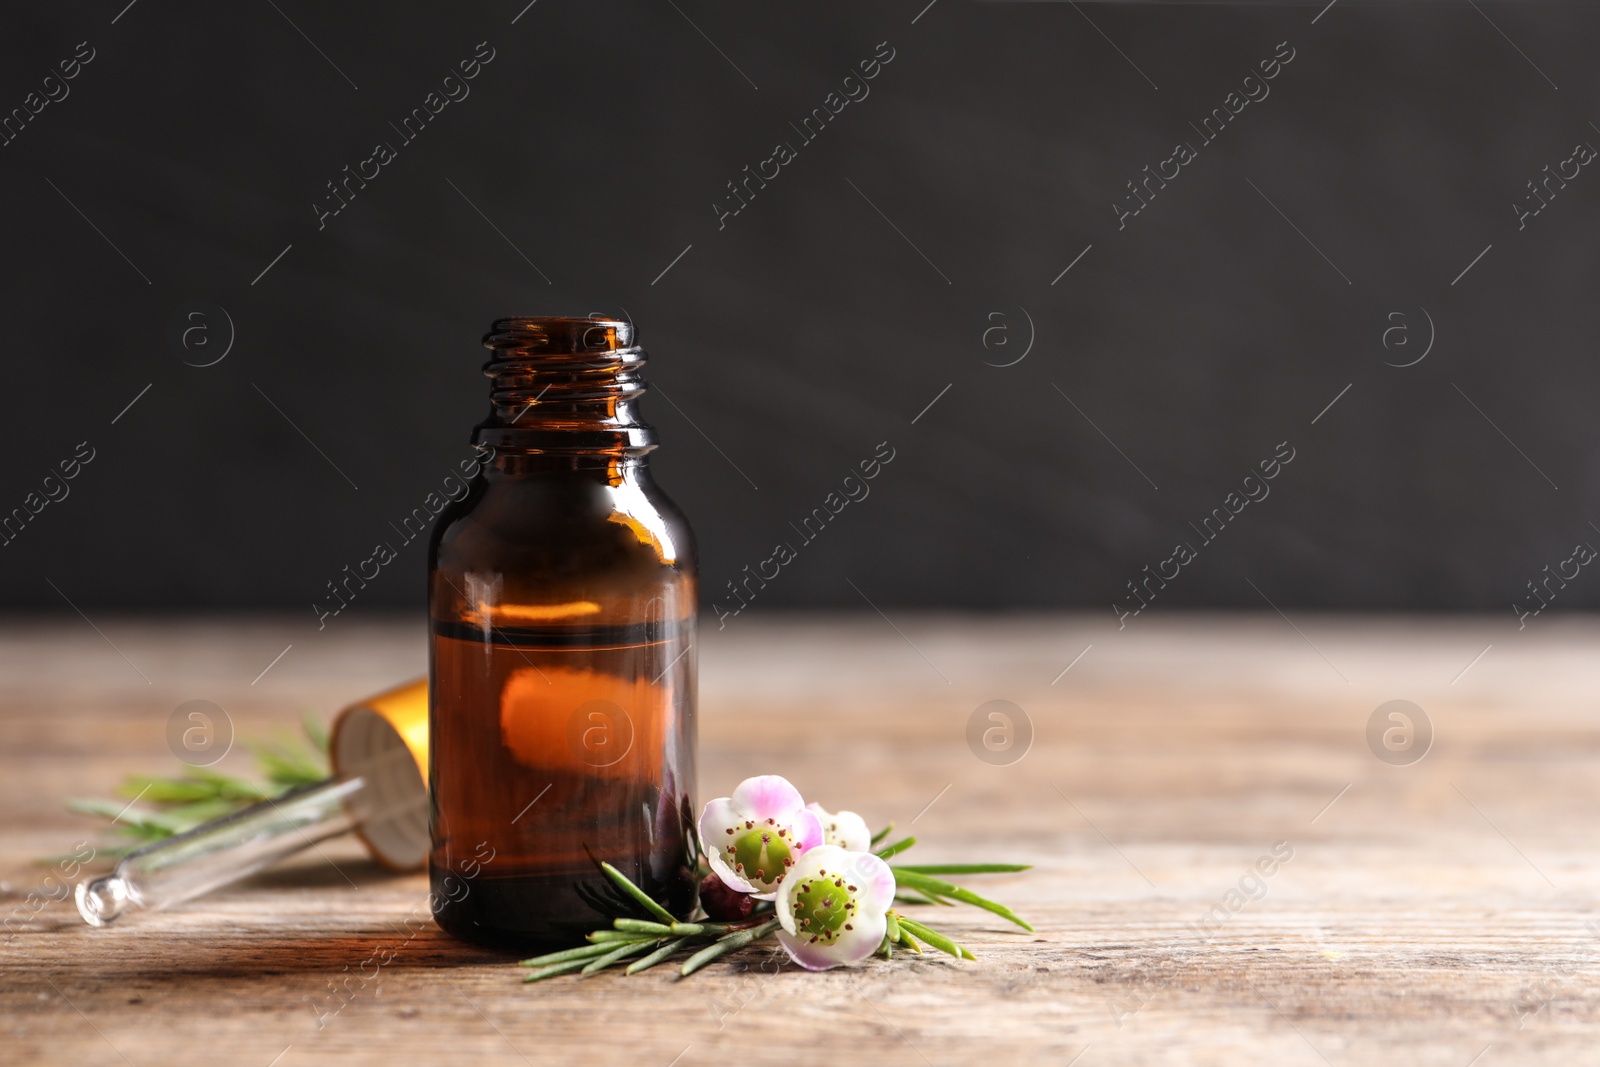 Photo of Bottle of natural tea tree oil and plant on table against dark background, space for text